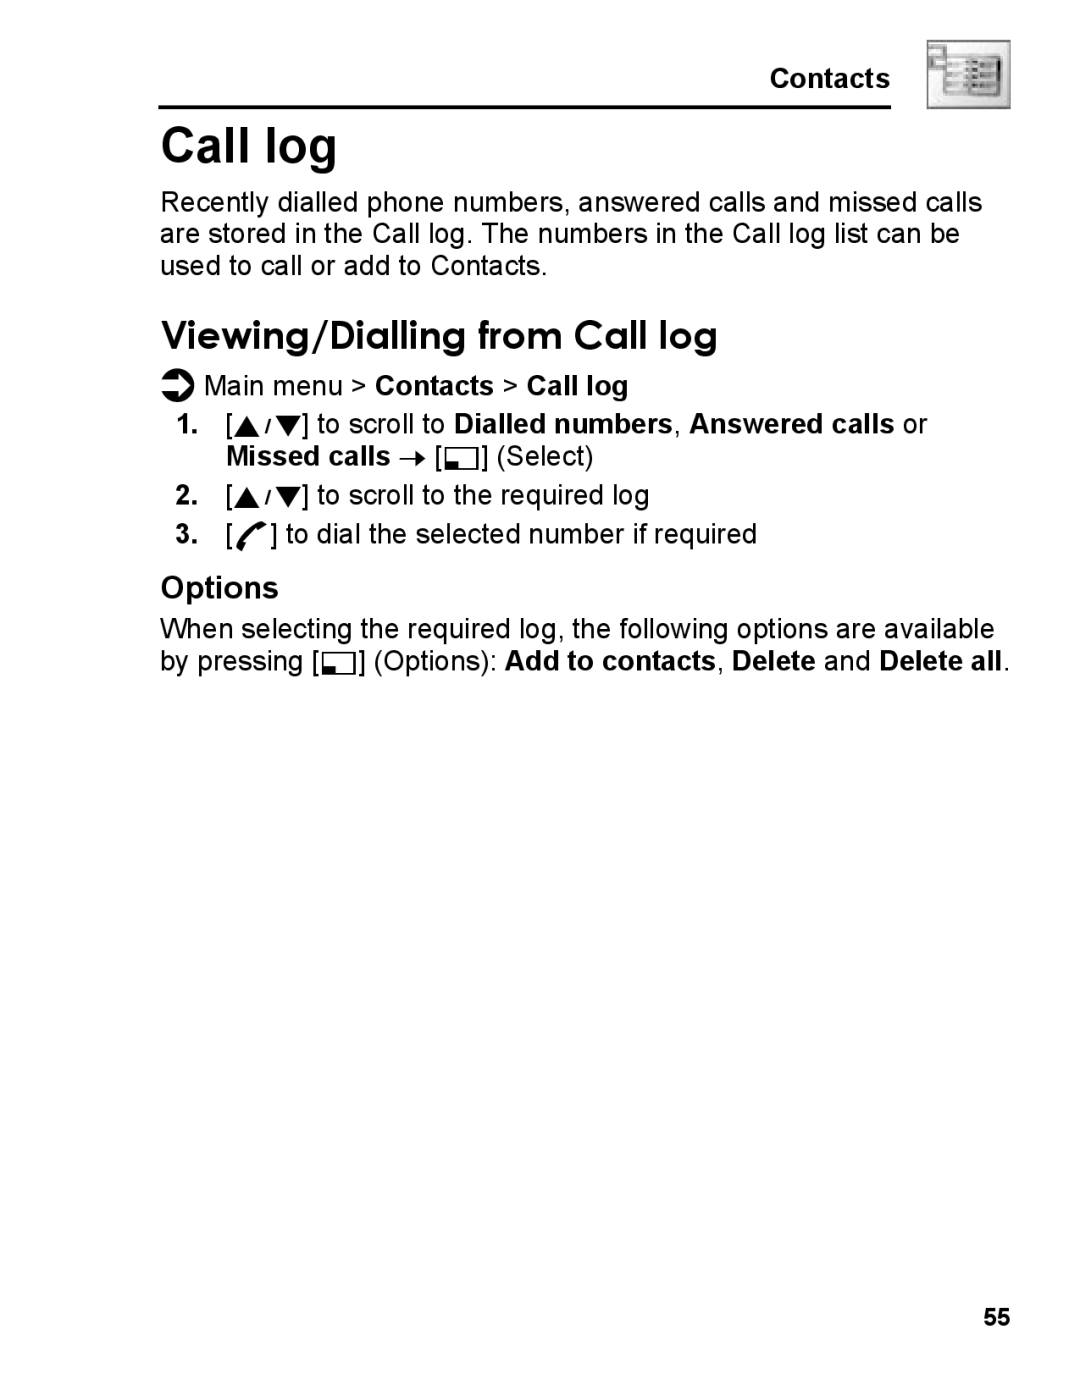 Panasonic A210 manual Viewing/Dialling from Call log 